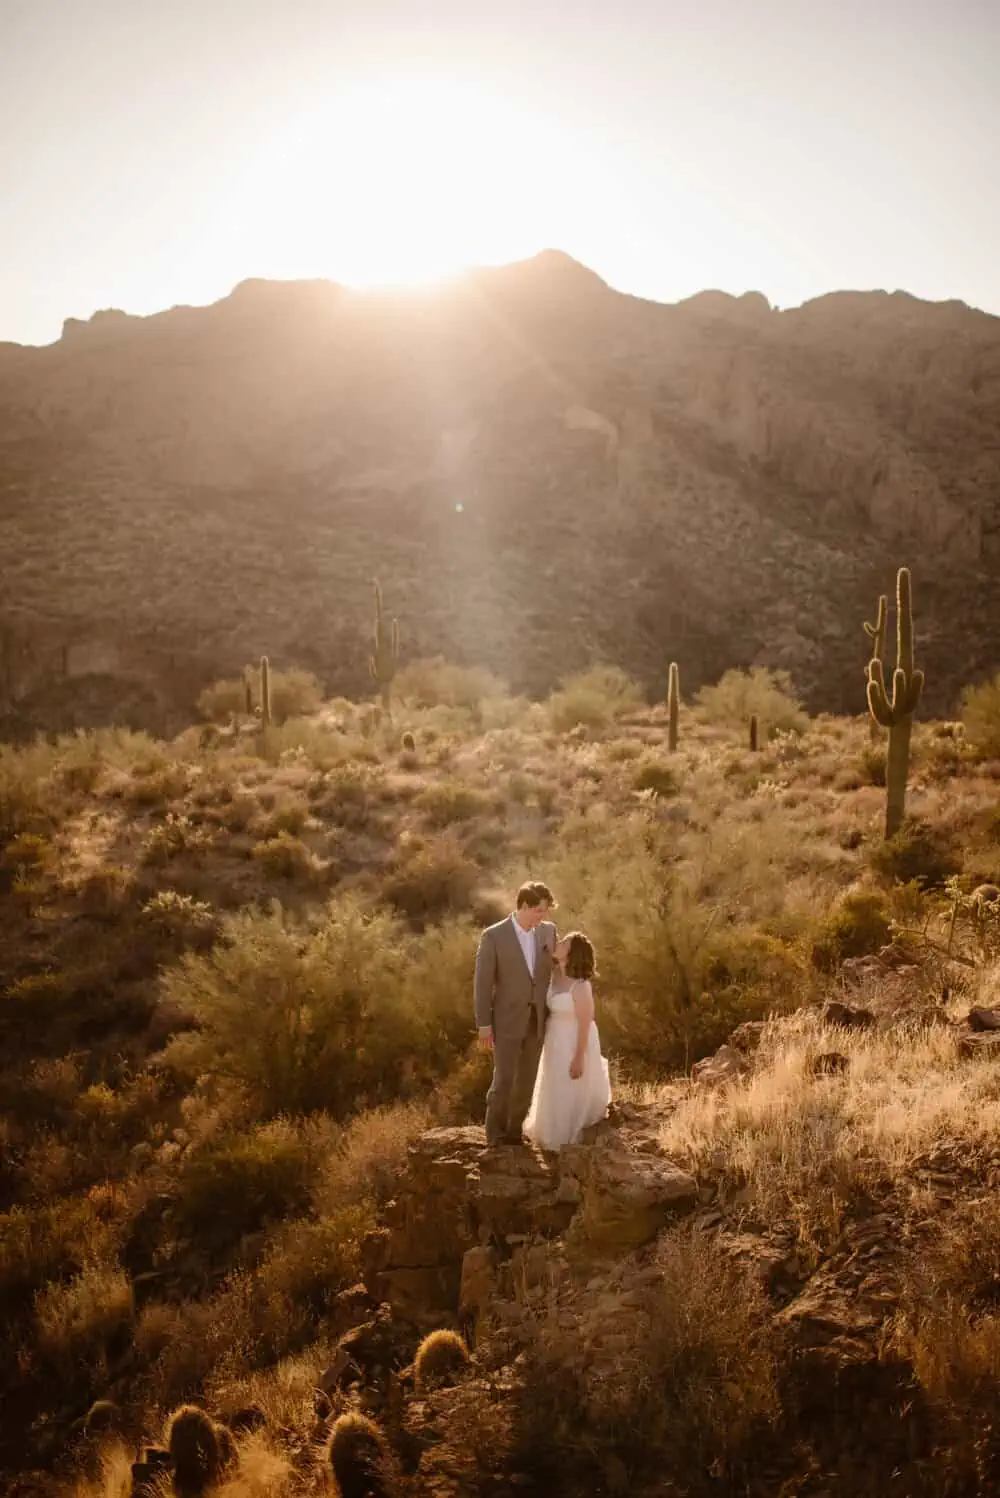 A couple stands in the desert together as the sun sets behind them.